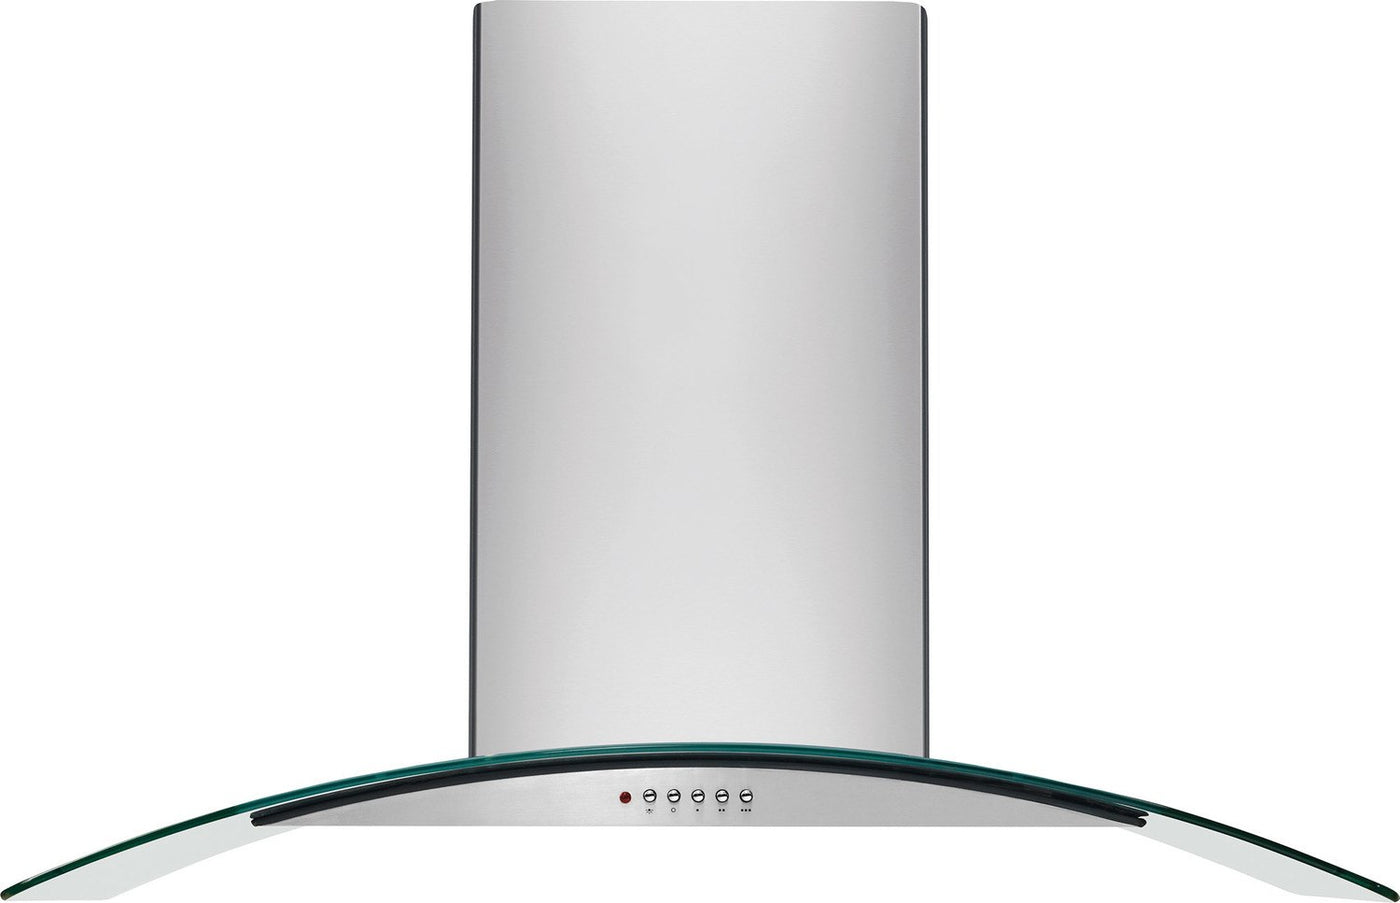 Frigidaire Stainless Steel and Glass 36" 400 CFM Wall-Mount Canopy Range Hood - FHWC3660LS